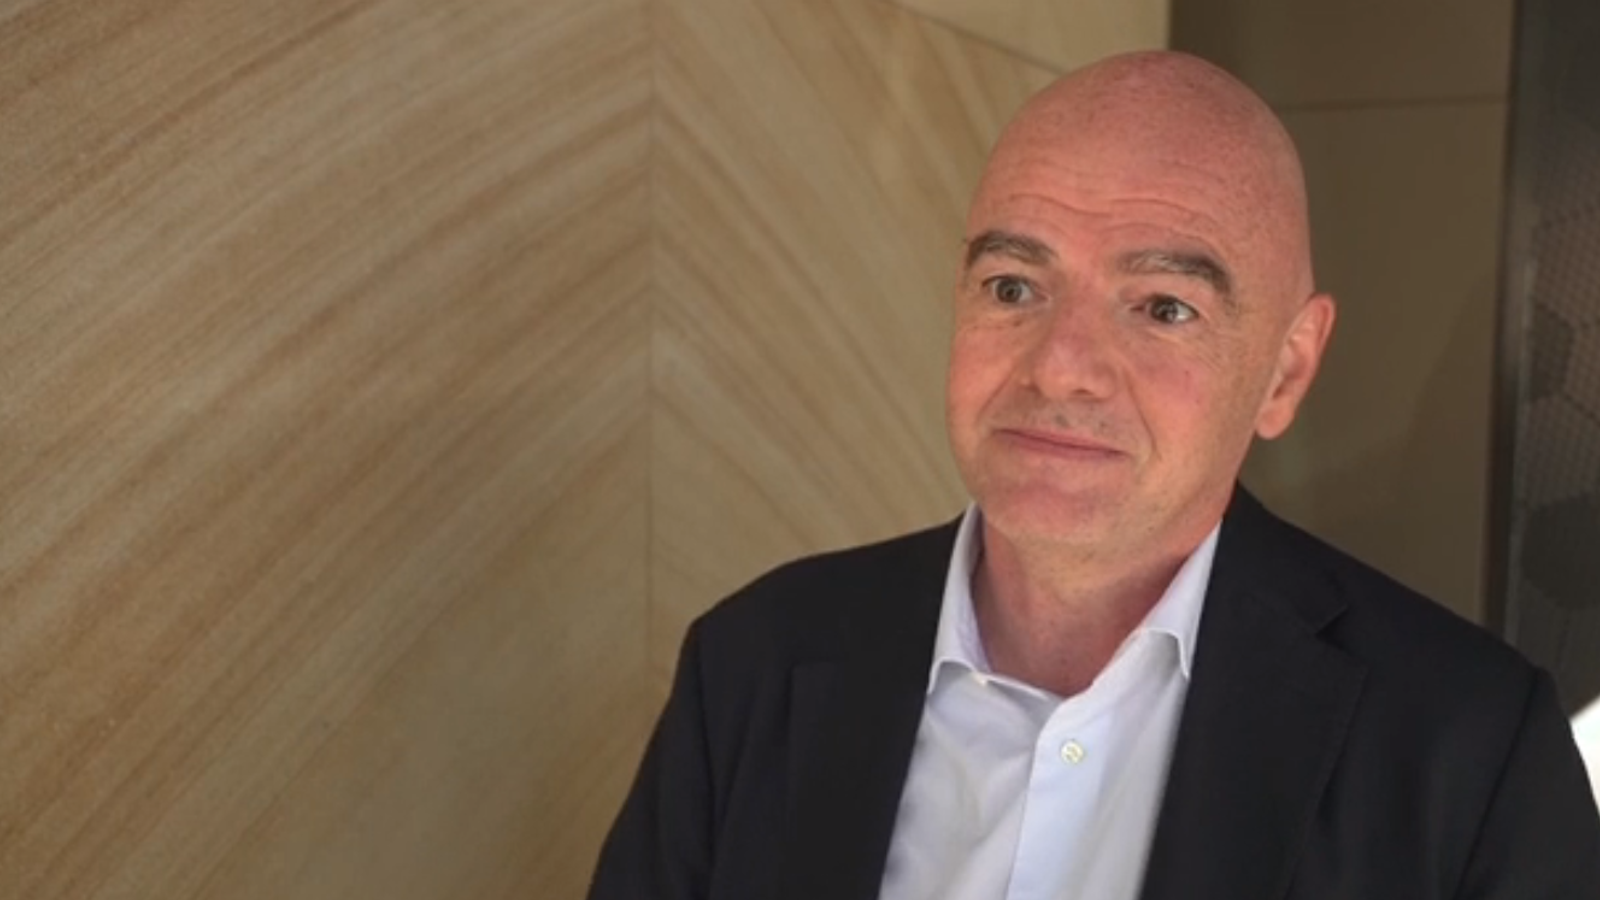 Women's World Cup: Gianni Infantino insists FIFA is 'a pioneer' for women's football after equal pay criticism